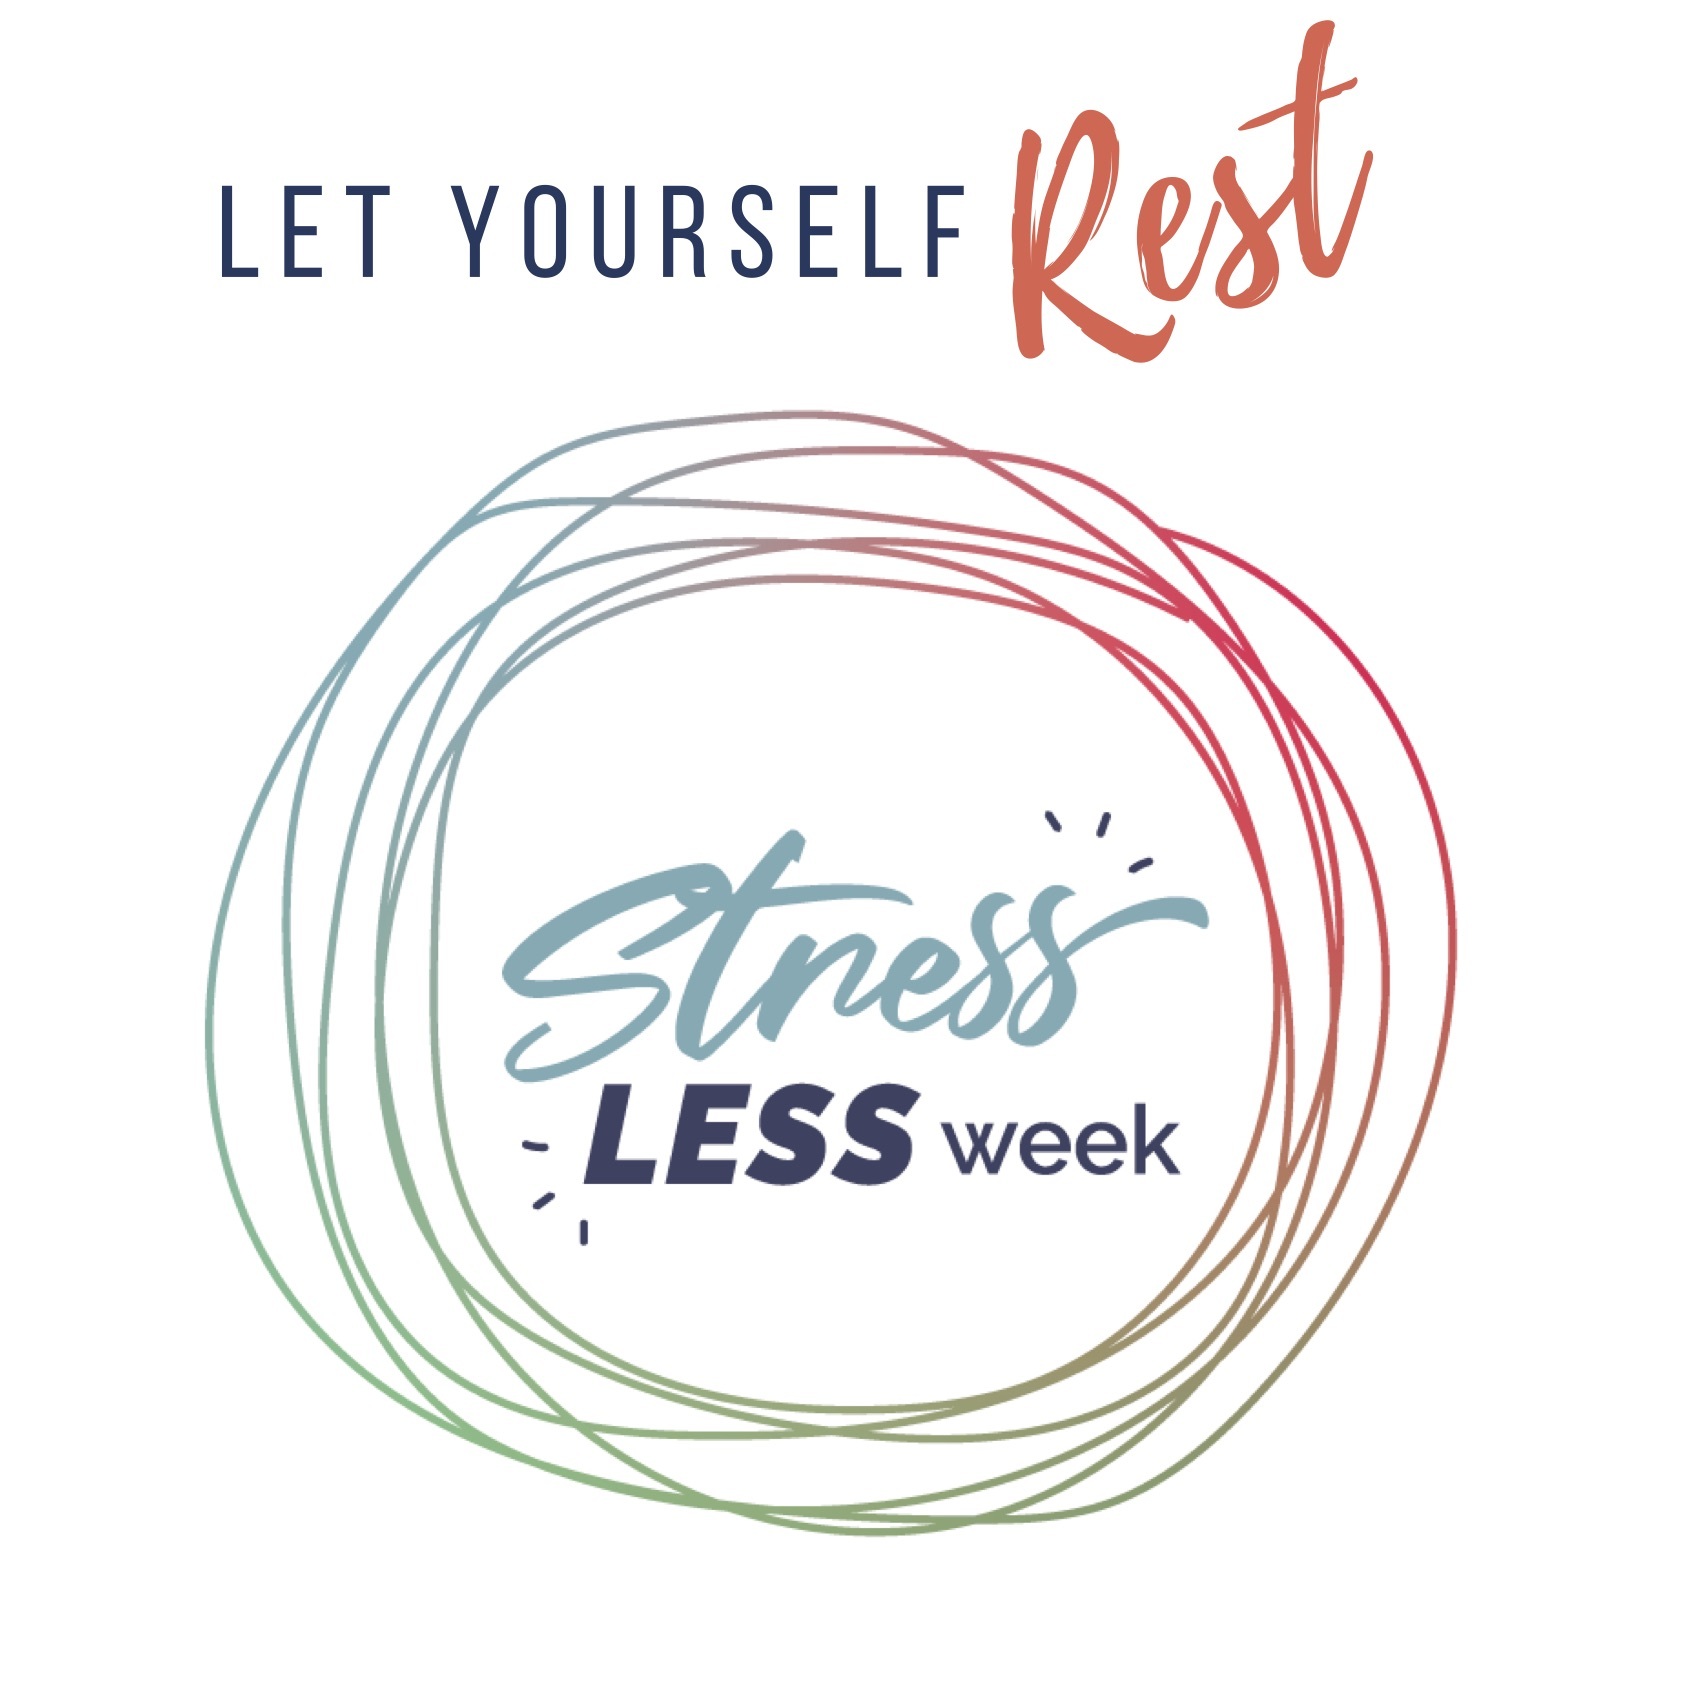 Copy of Let yourself rest